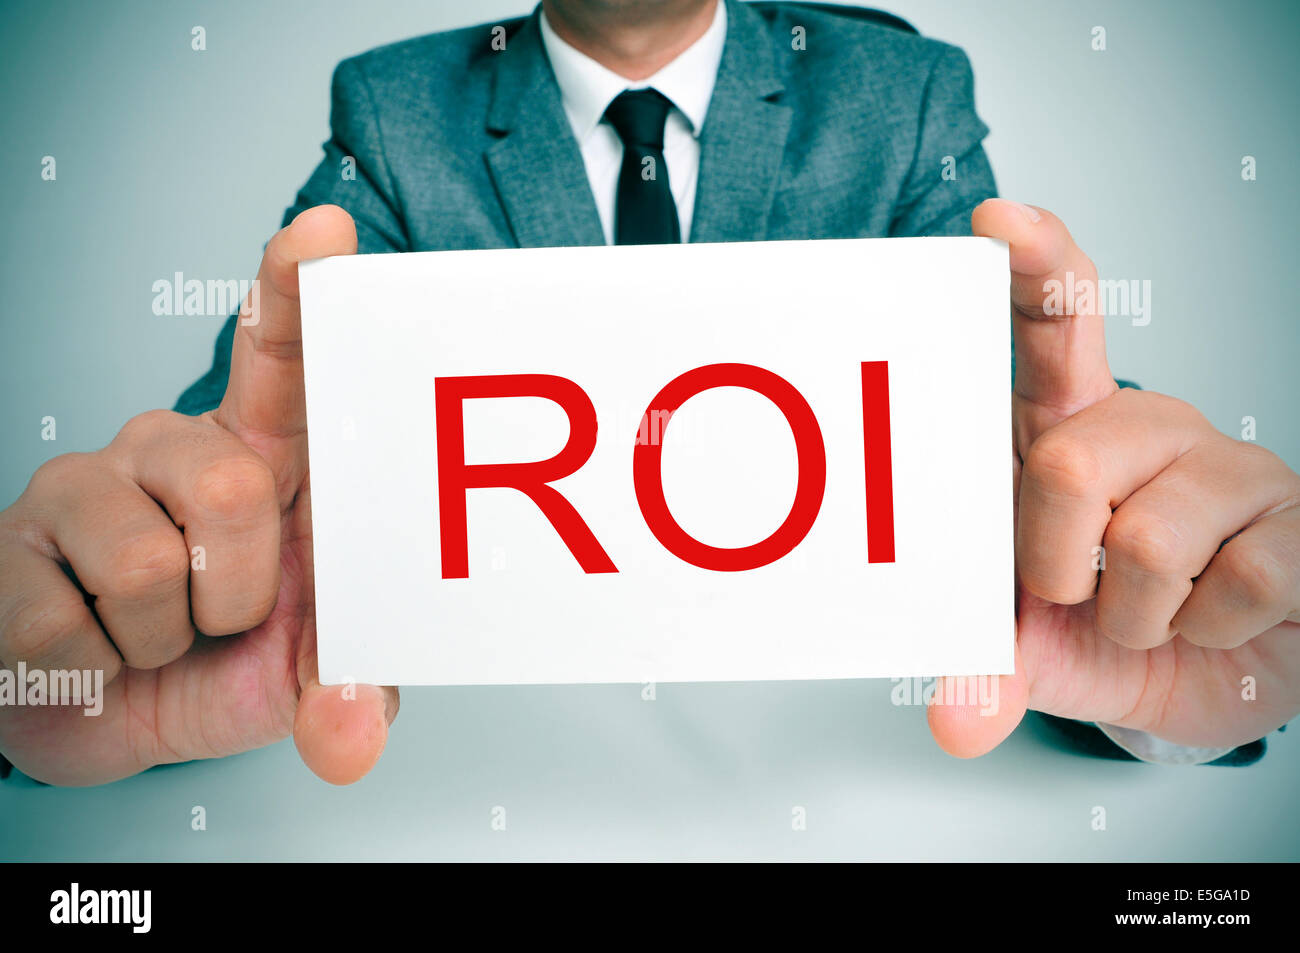 businessman sitting in a desk showing a signboard with the text ROI, ROI, acronym for Rate of Interest or Return on Investment, Stock Photo